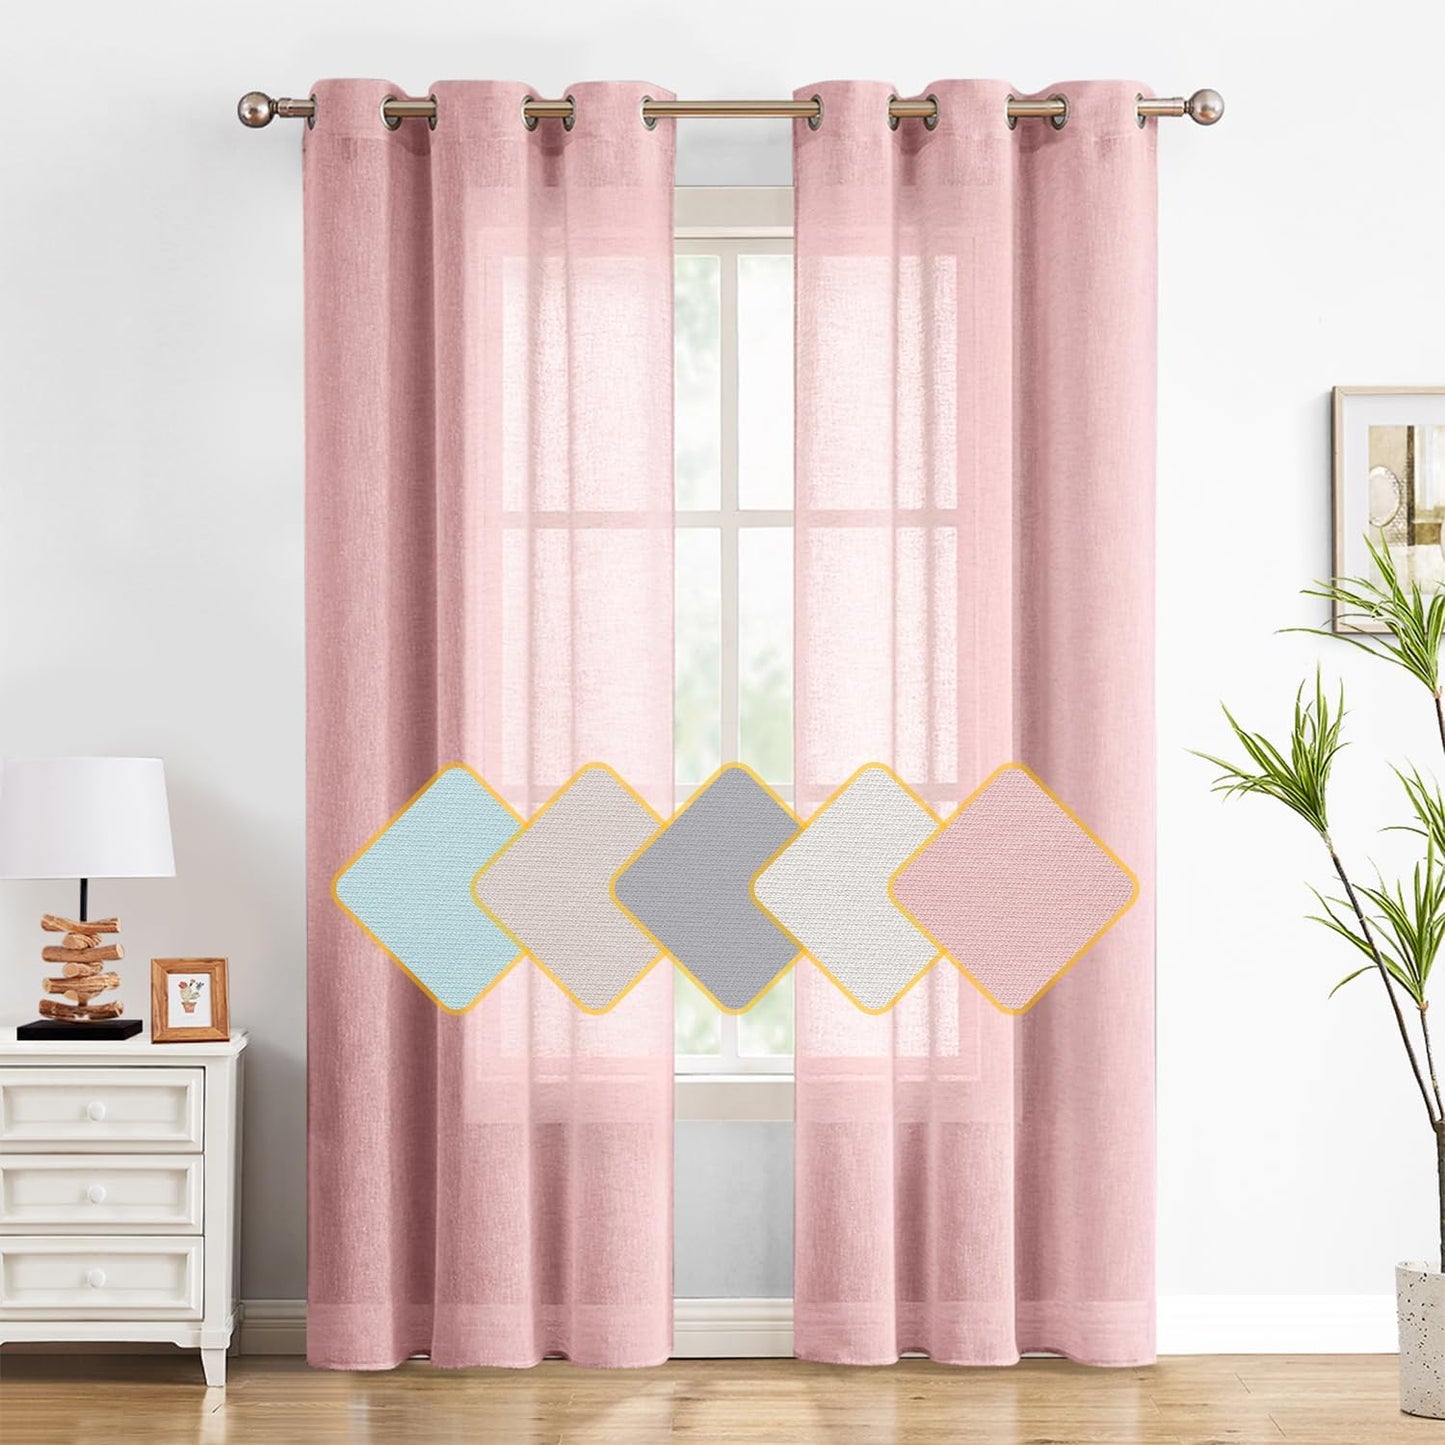 Fragrantex Linen Sheer Turquoise Curtains Panels for Bedroom 84 Inches Aqua Maldives Voile Curtain Drapes for Living Room Window Treatment Sets 2 Panels Grommet Header,40" W X 84" L  Home decor realm Blush Pink 40" X 95"X2 